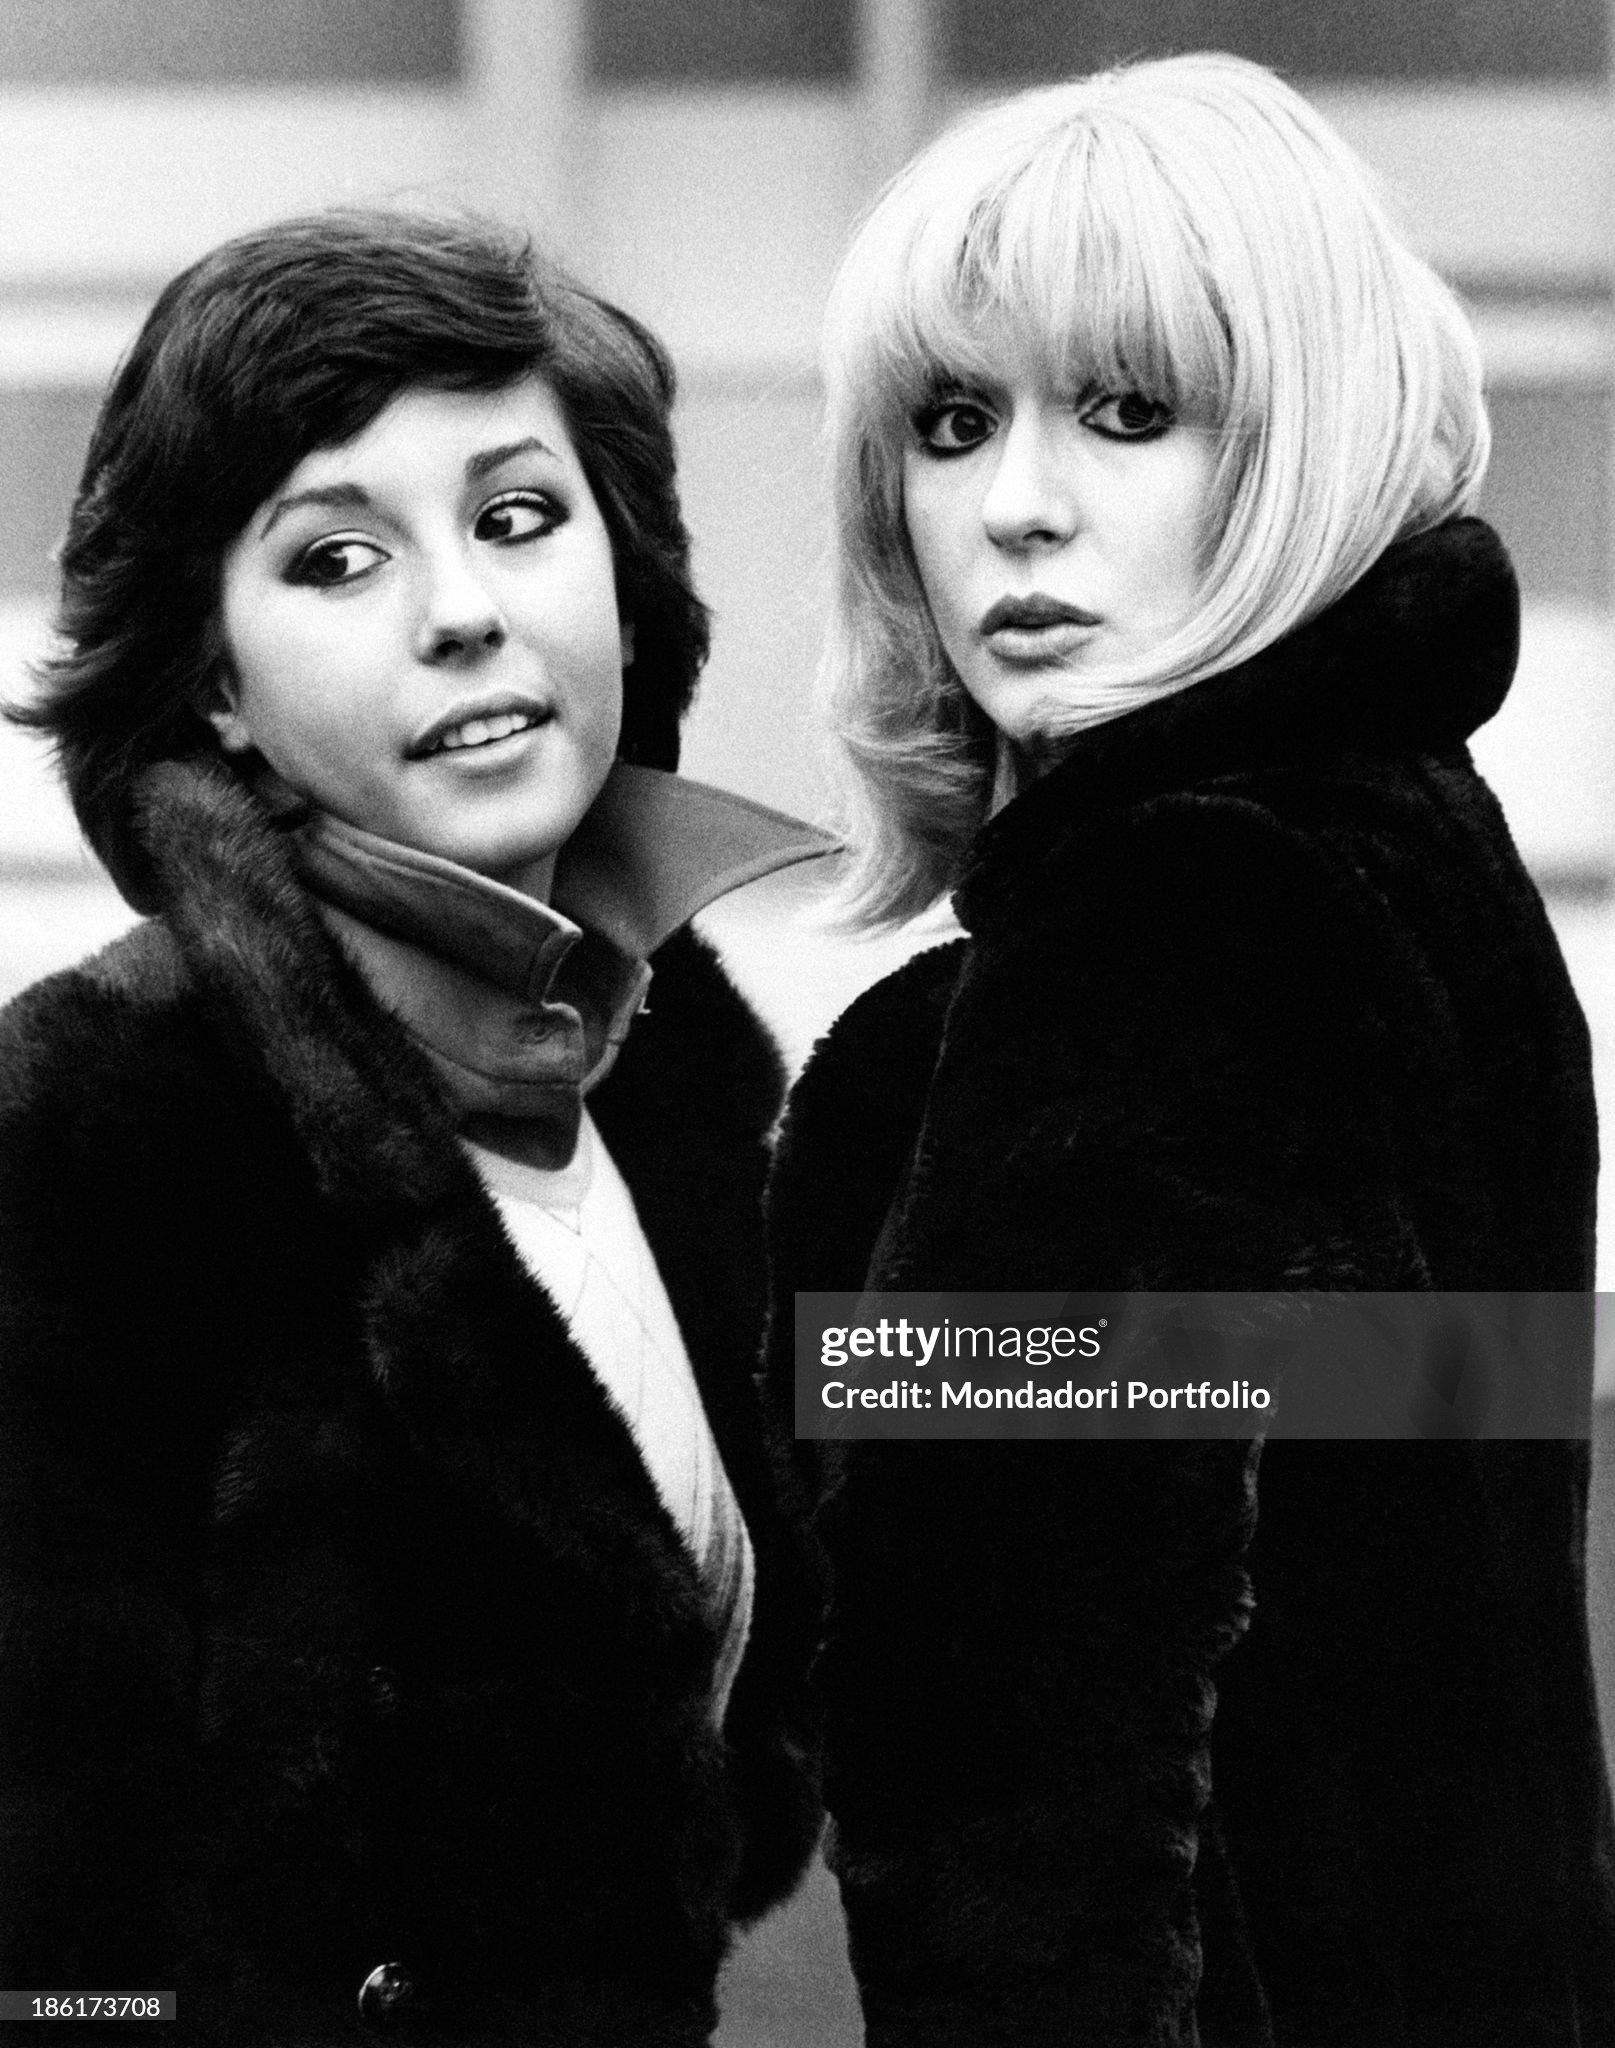 The Italian actress and singer Daniela Goggi (on the left) is posing next to her older sister, the singer, actress and show girl Loretta, in Milan in 1973.